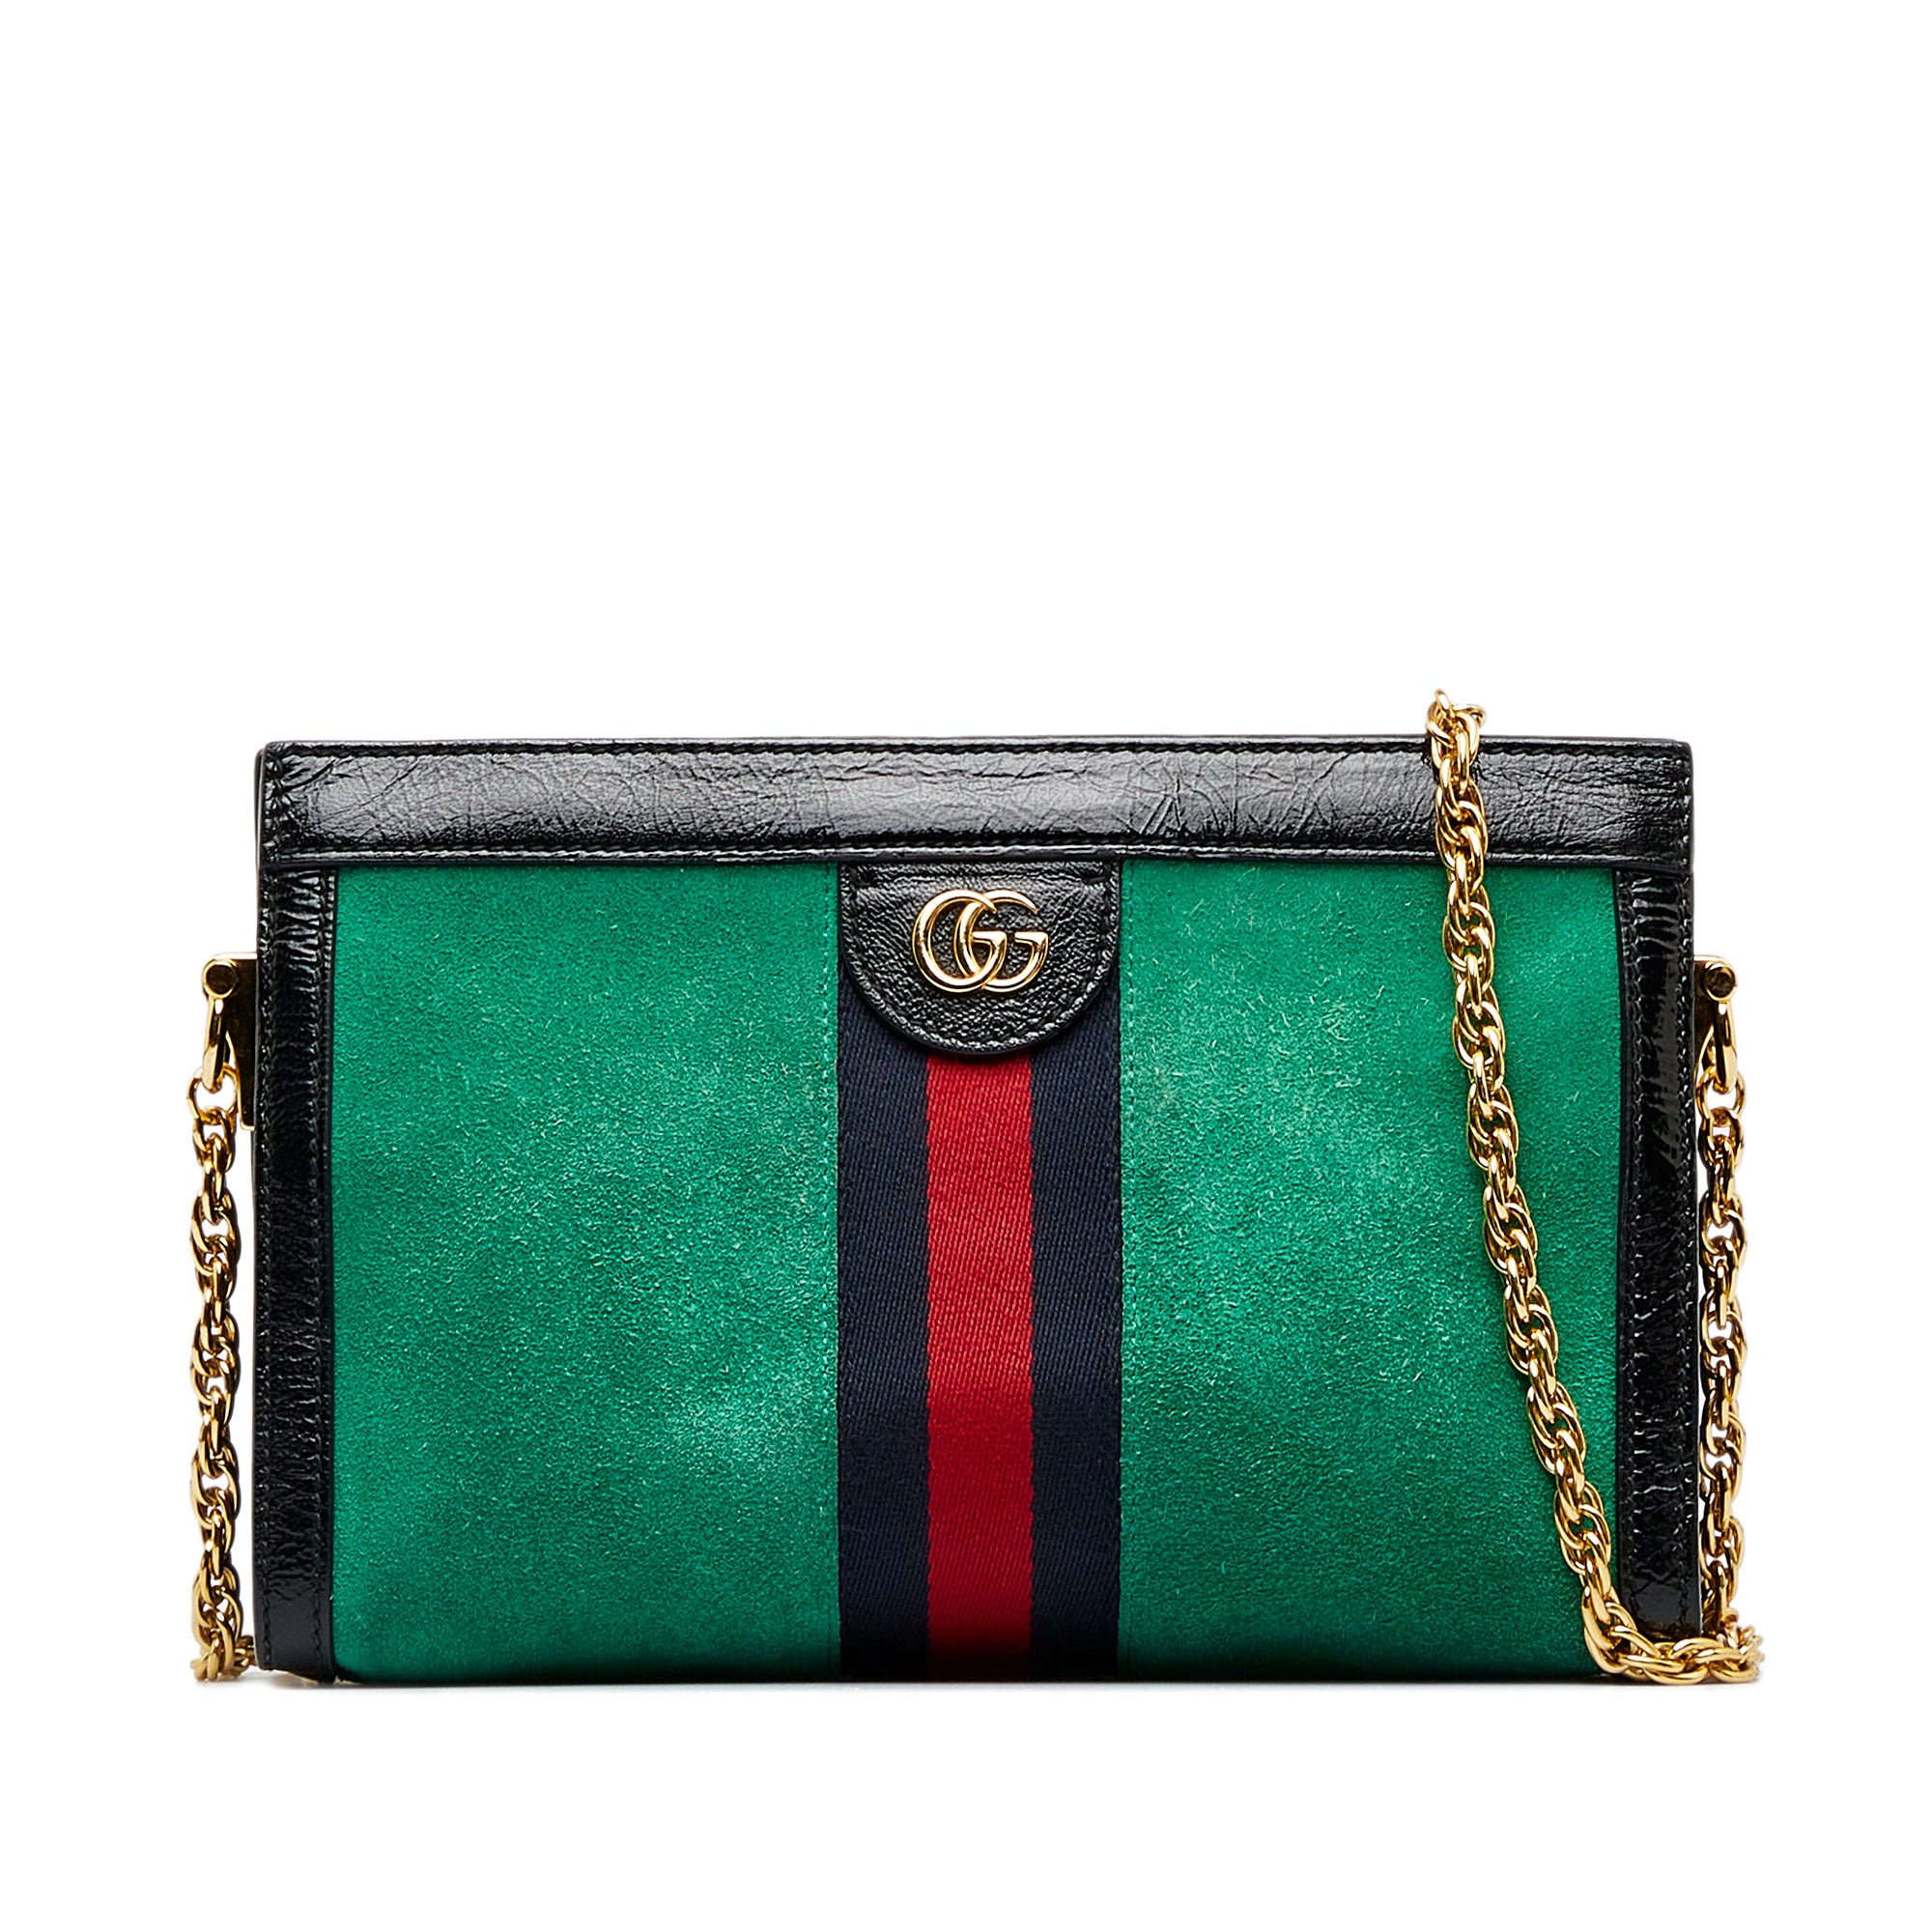 Unboxing Gucci Ophidia GG key pouch  Converting into A Small Crossbody Bag  